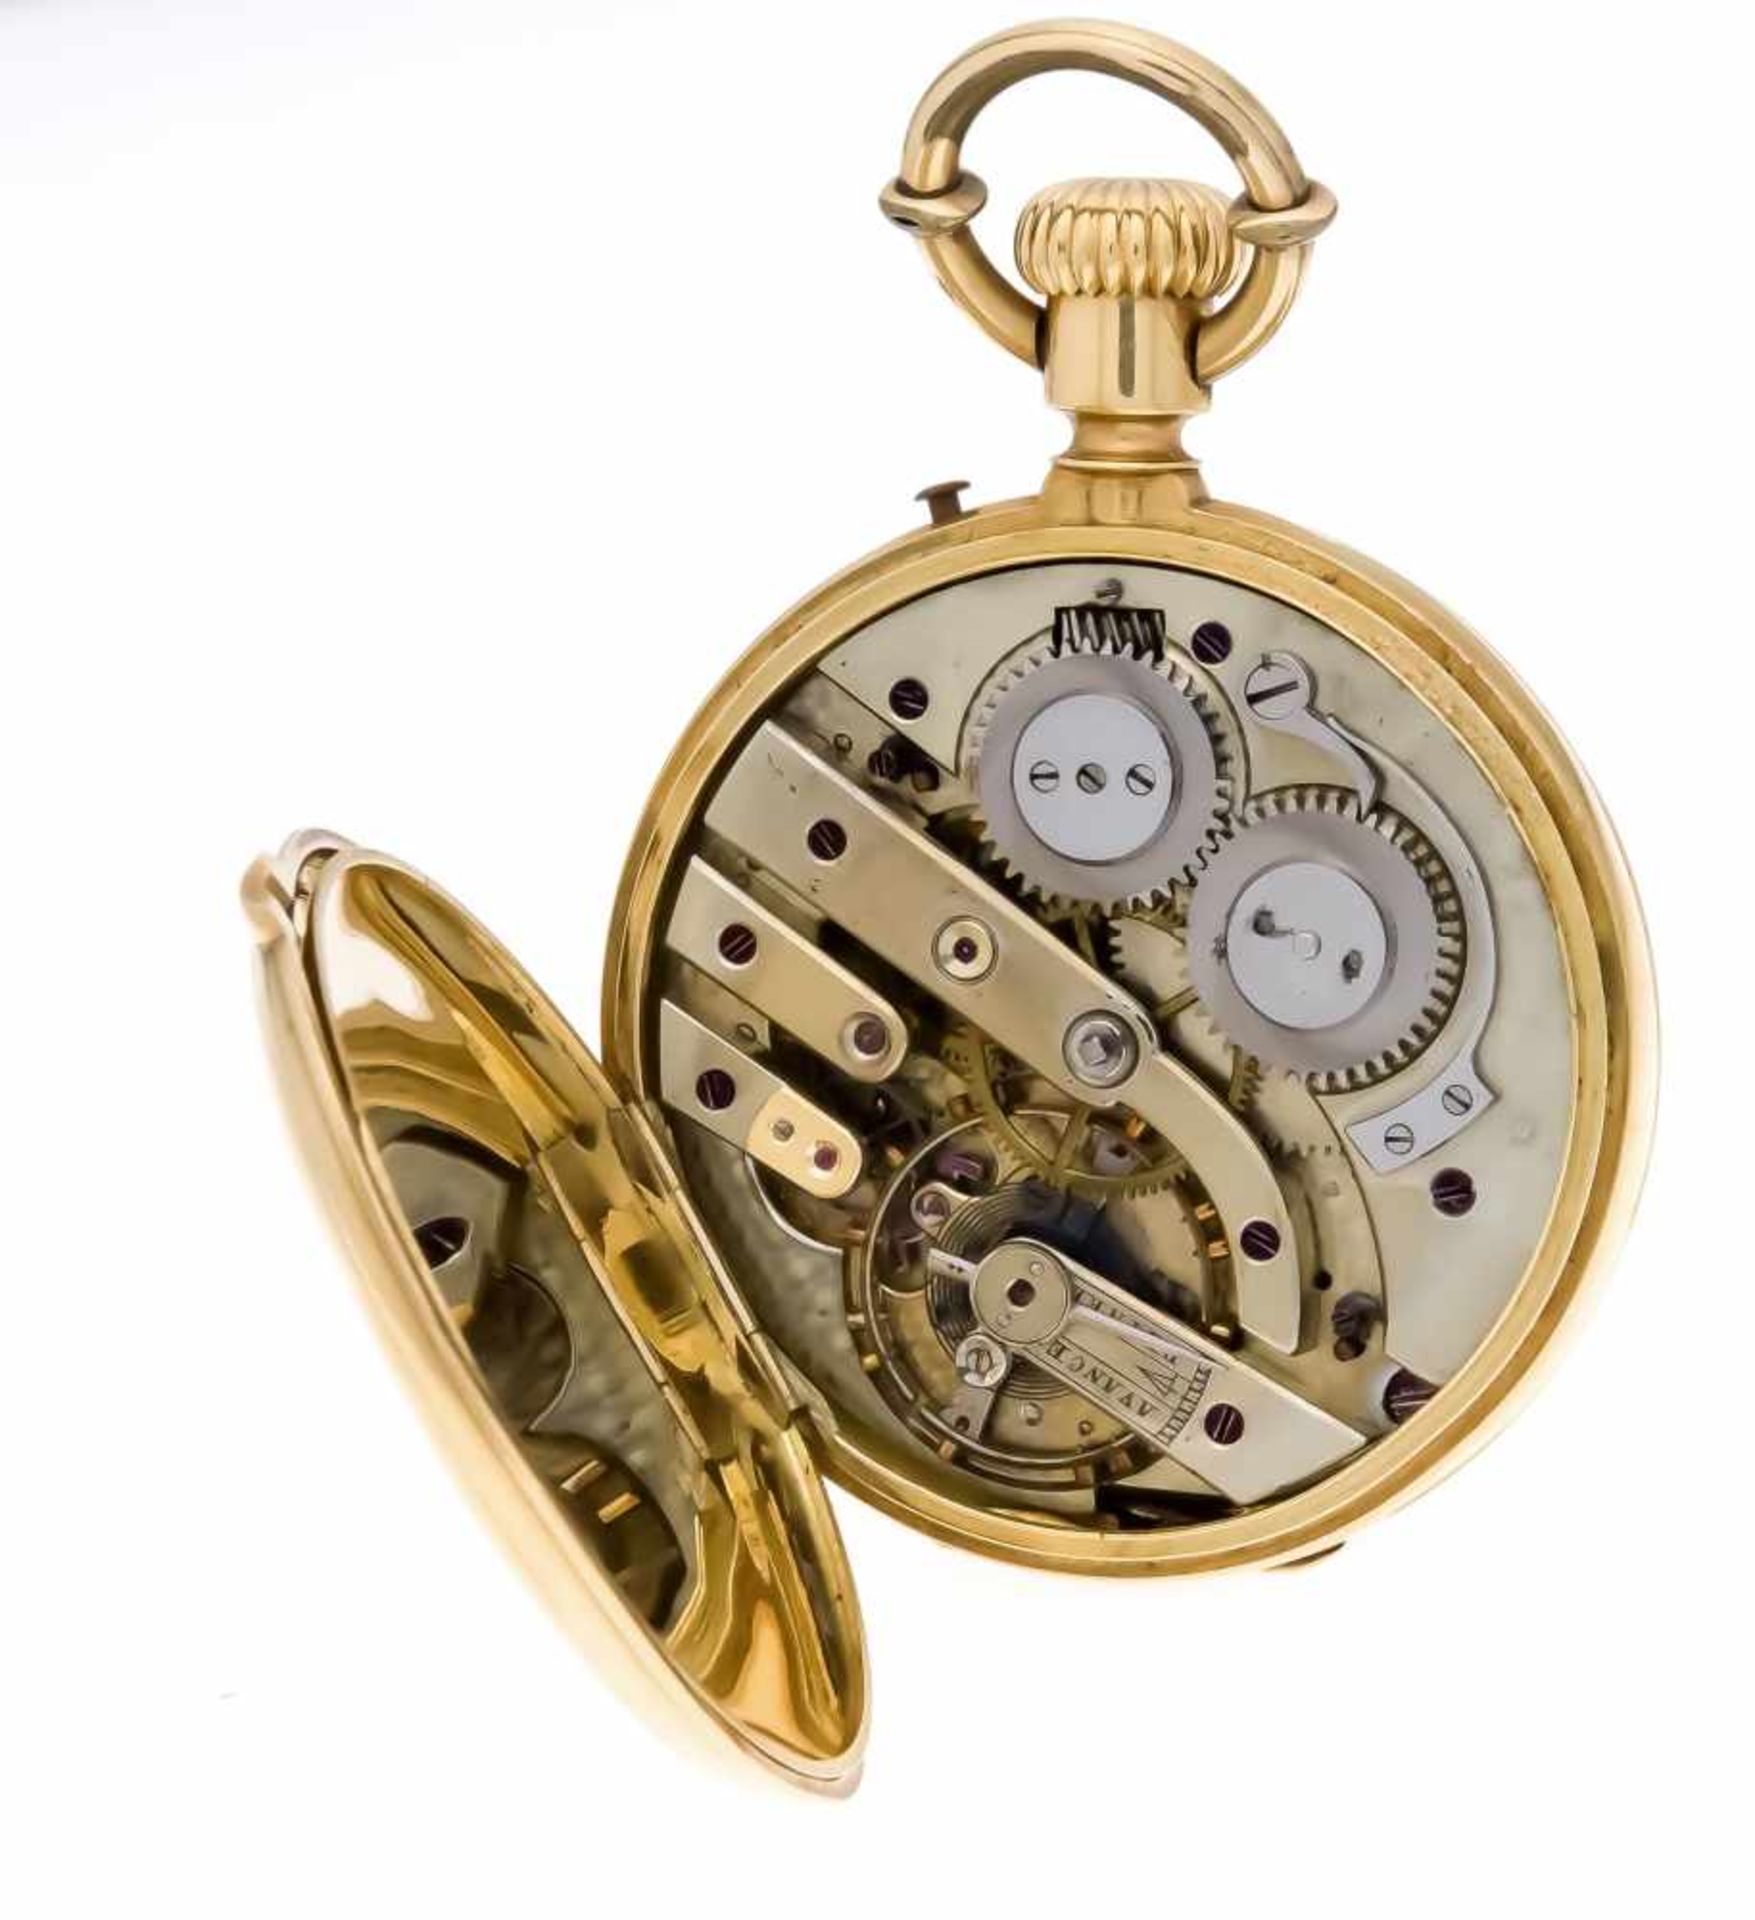 Men's pocket watch spring cover yellow gold / 750, 3 covers gold, anchor movement is - Bild 2 aus 3